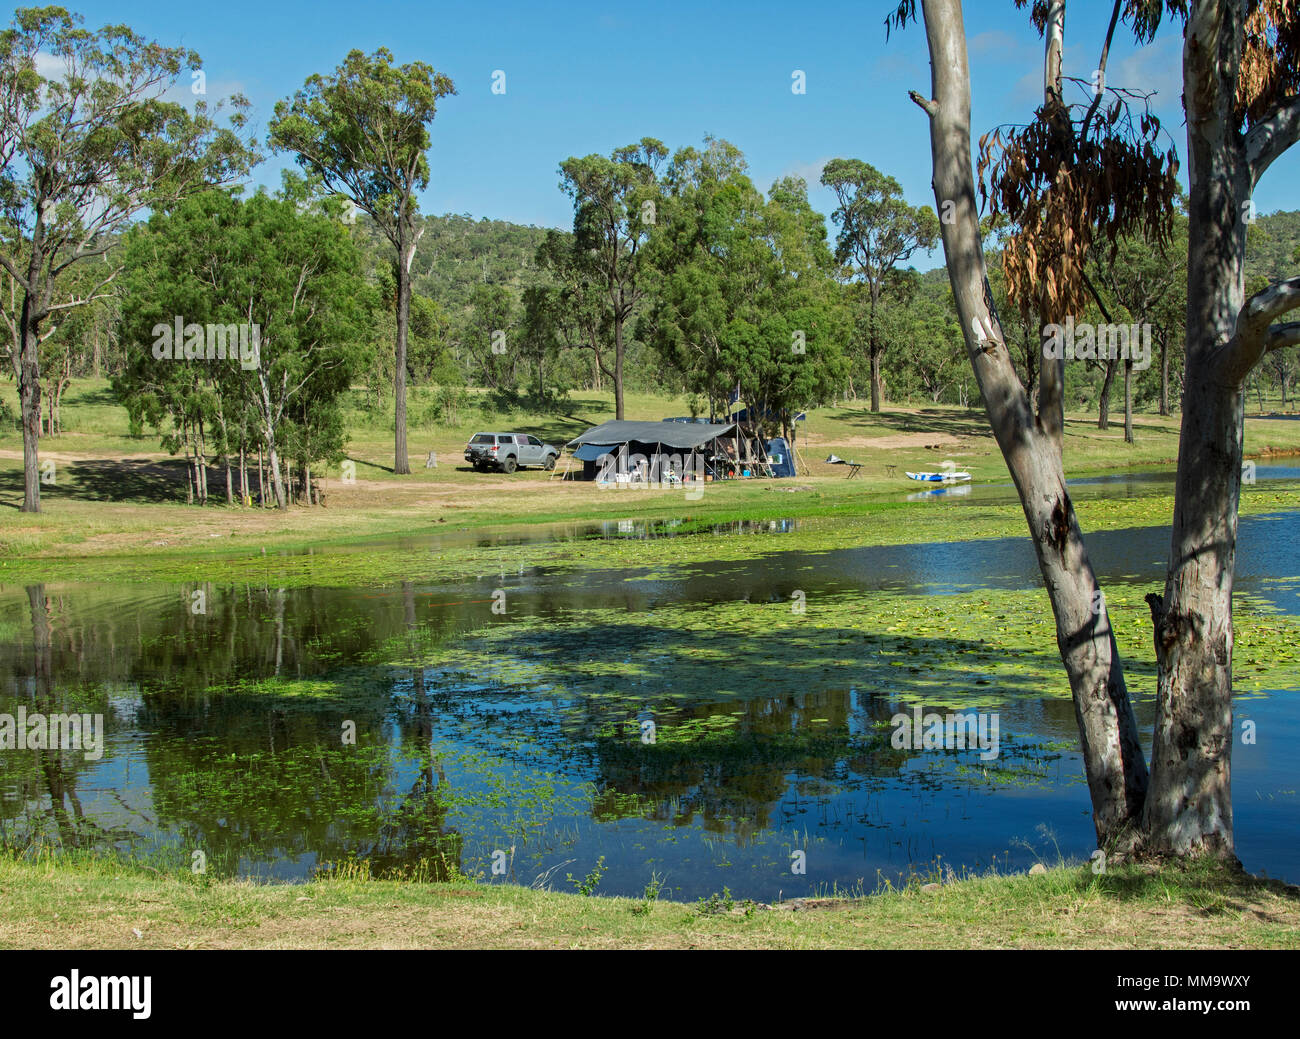 Campers with tent and car in stunning forested landscape that's reflected in calm blue waters of lake under blue sky at Eungalla dam Australia Stock Photo